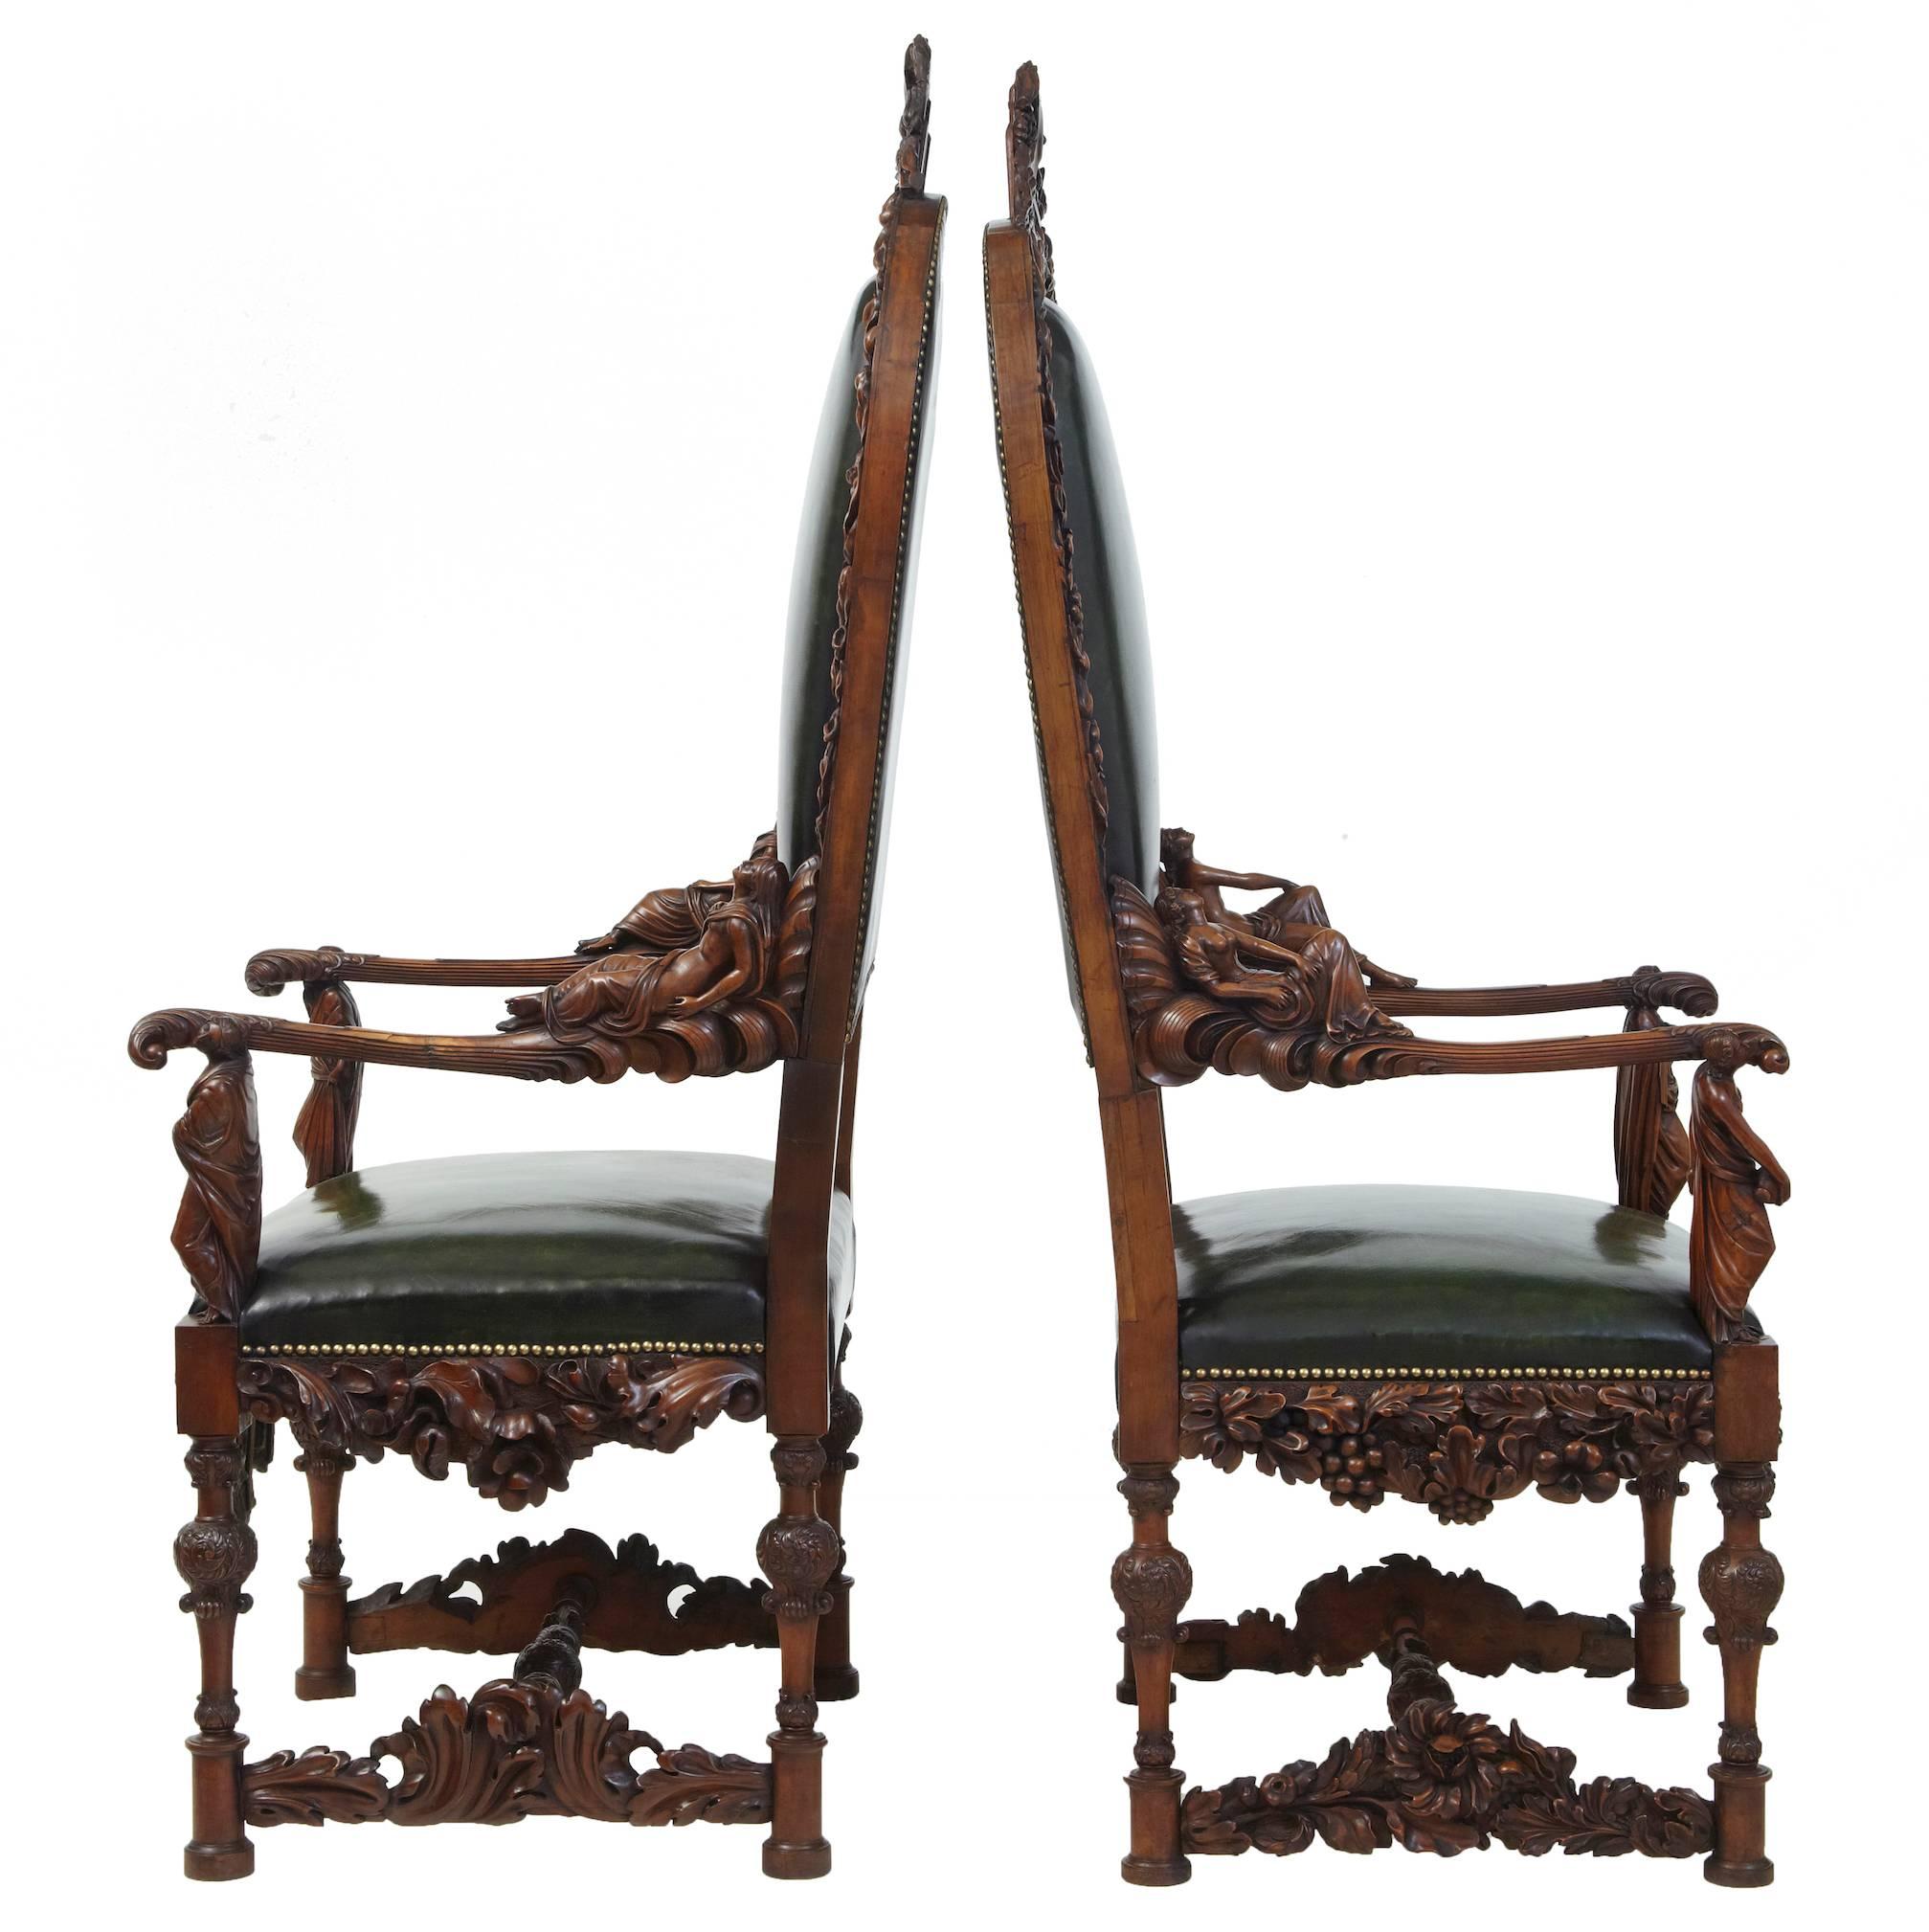 Pair of 19th century carved walnut Florentine Renaissance armchairs
Stunning carved Renaissance Revival throne chairs, circa 1860.
Profusely carved all-over.
Depicting eight classical carved figures, four of which are reclining nudes.
Fluted